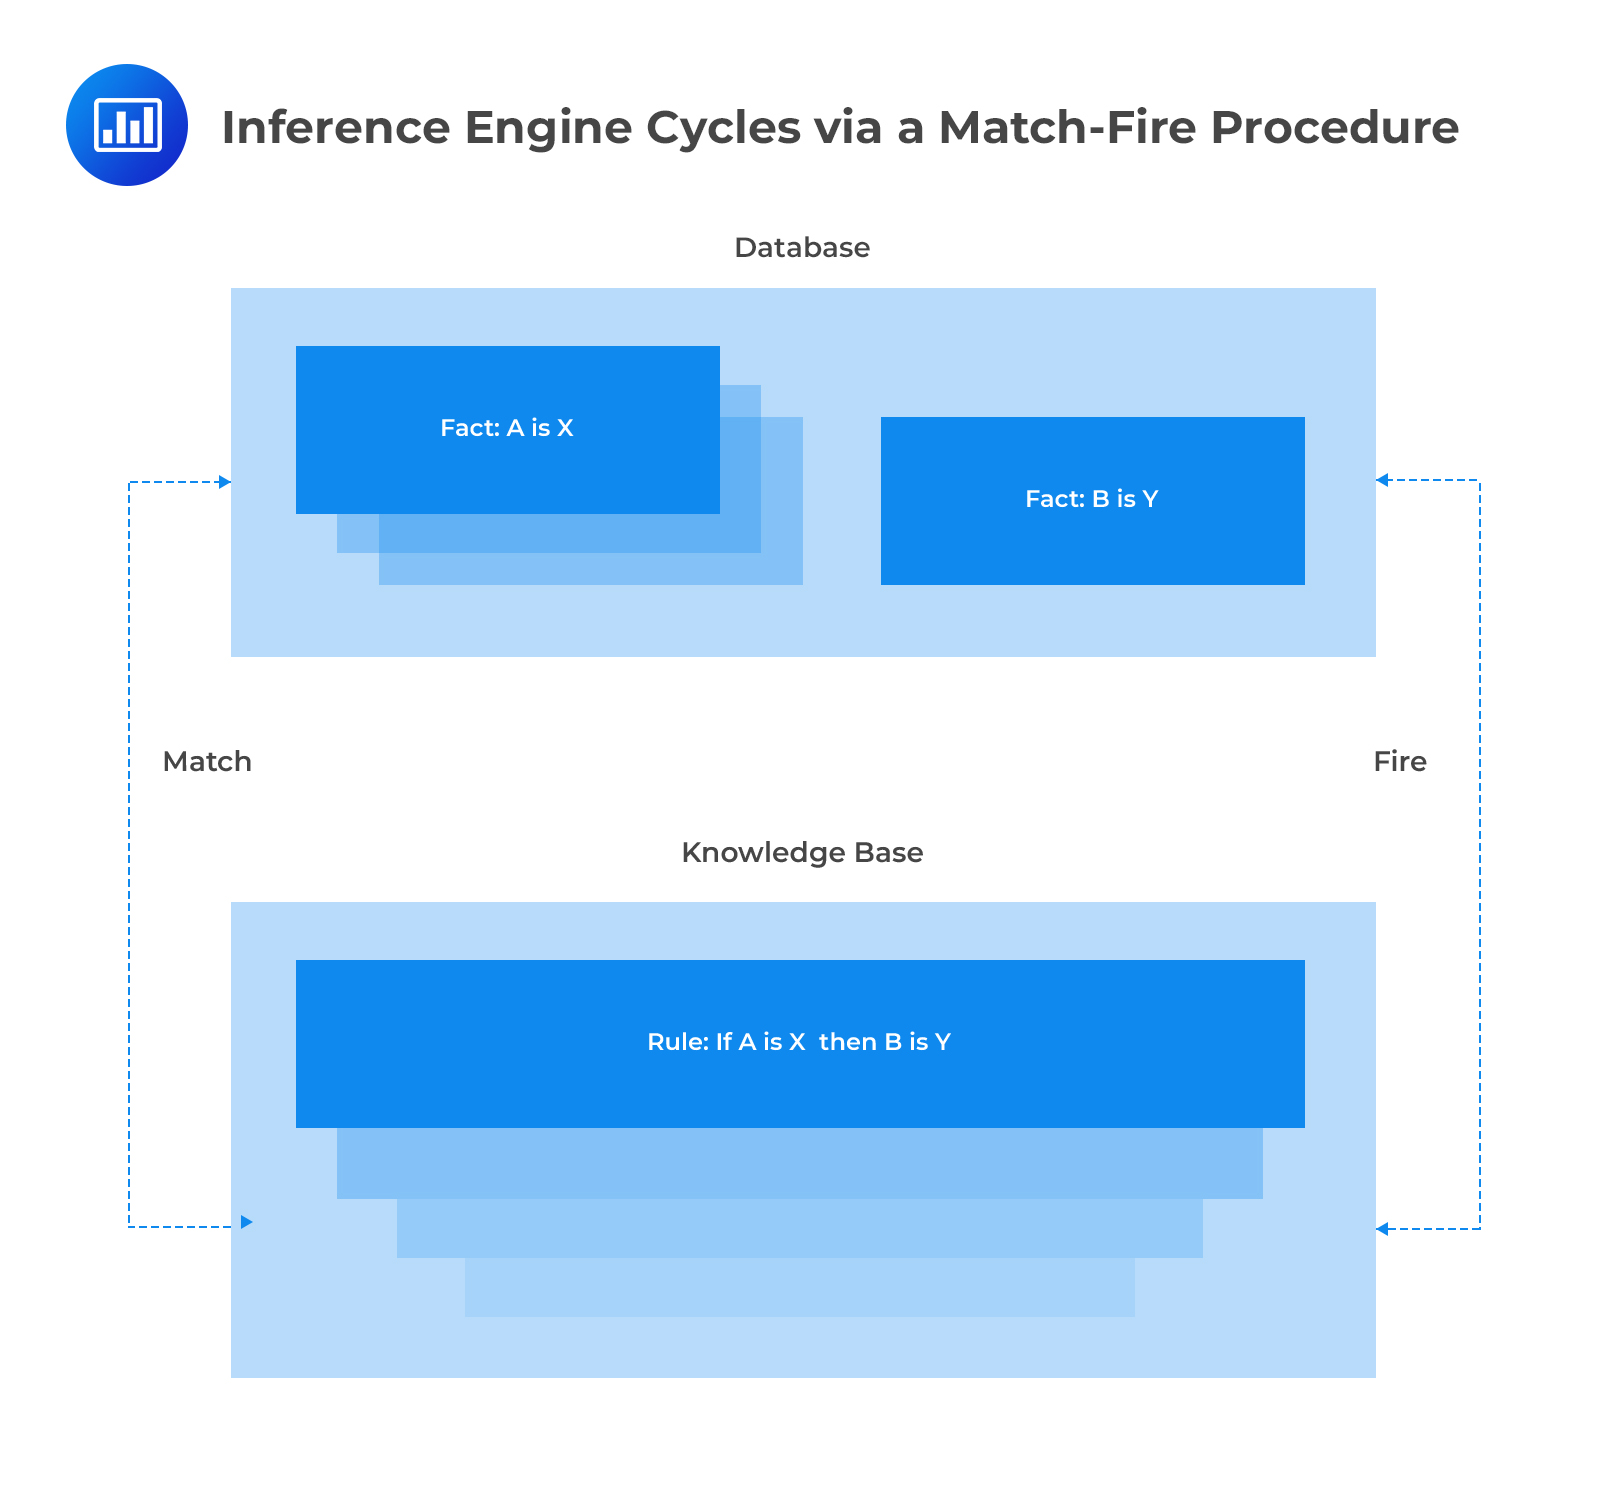 Inference Engine Cycles via a Match-Fire Procedure